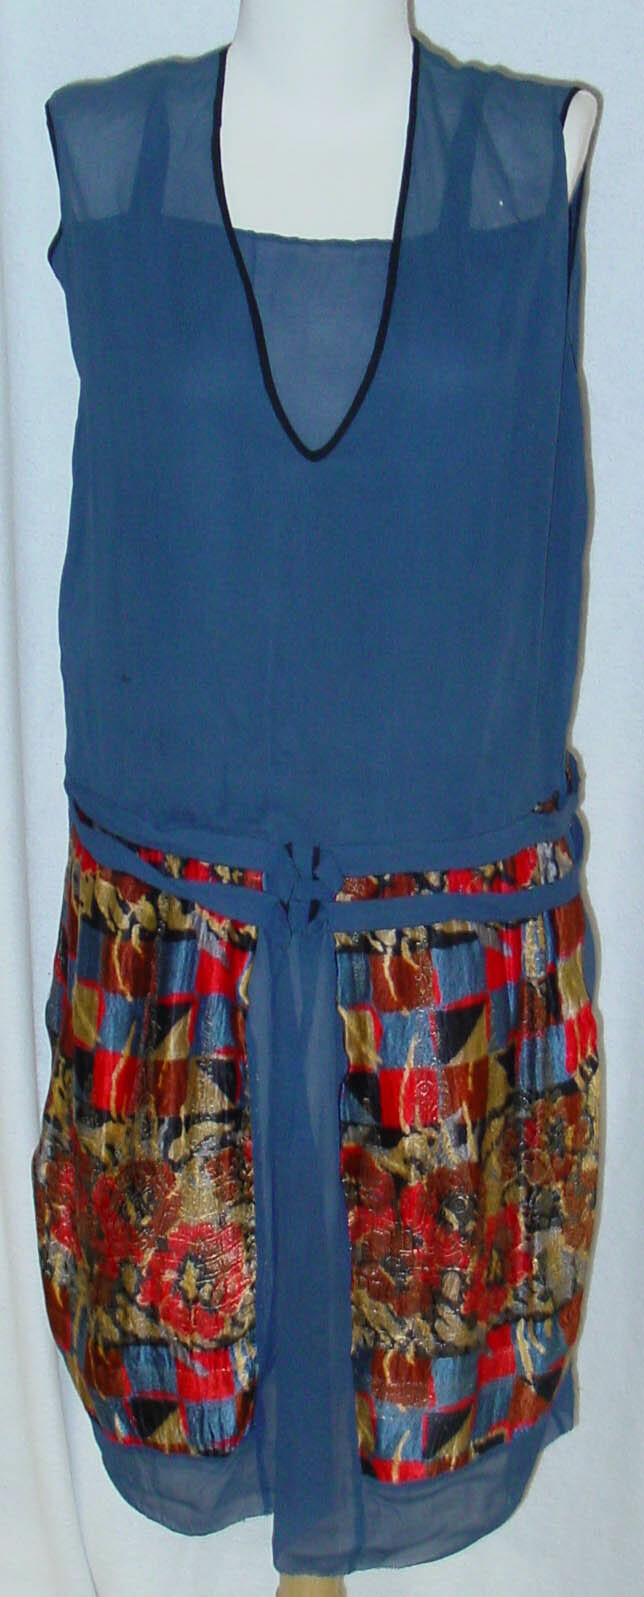 This evening dress from about 1926, an example of Jazz Age fashion, is made of dark blue pure silk chiffon and features a skirt with a Persian pattern over a Cubist background. It is one of the earliest items in the Mackenzie collection. Canterbury Museum 1984.70.454